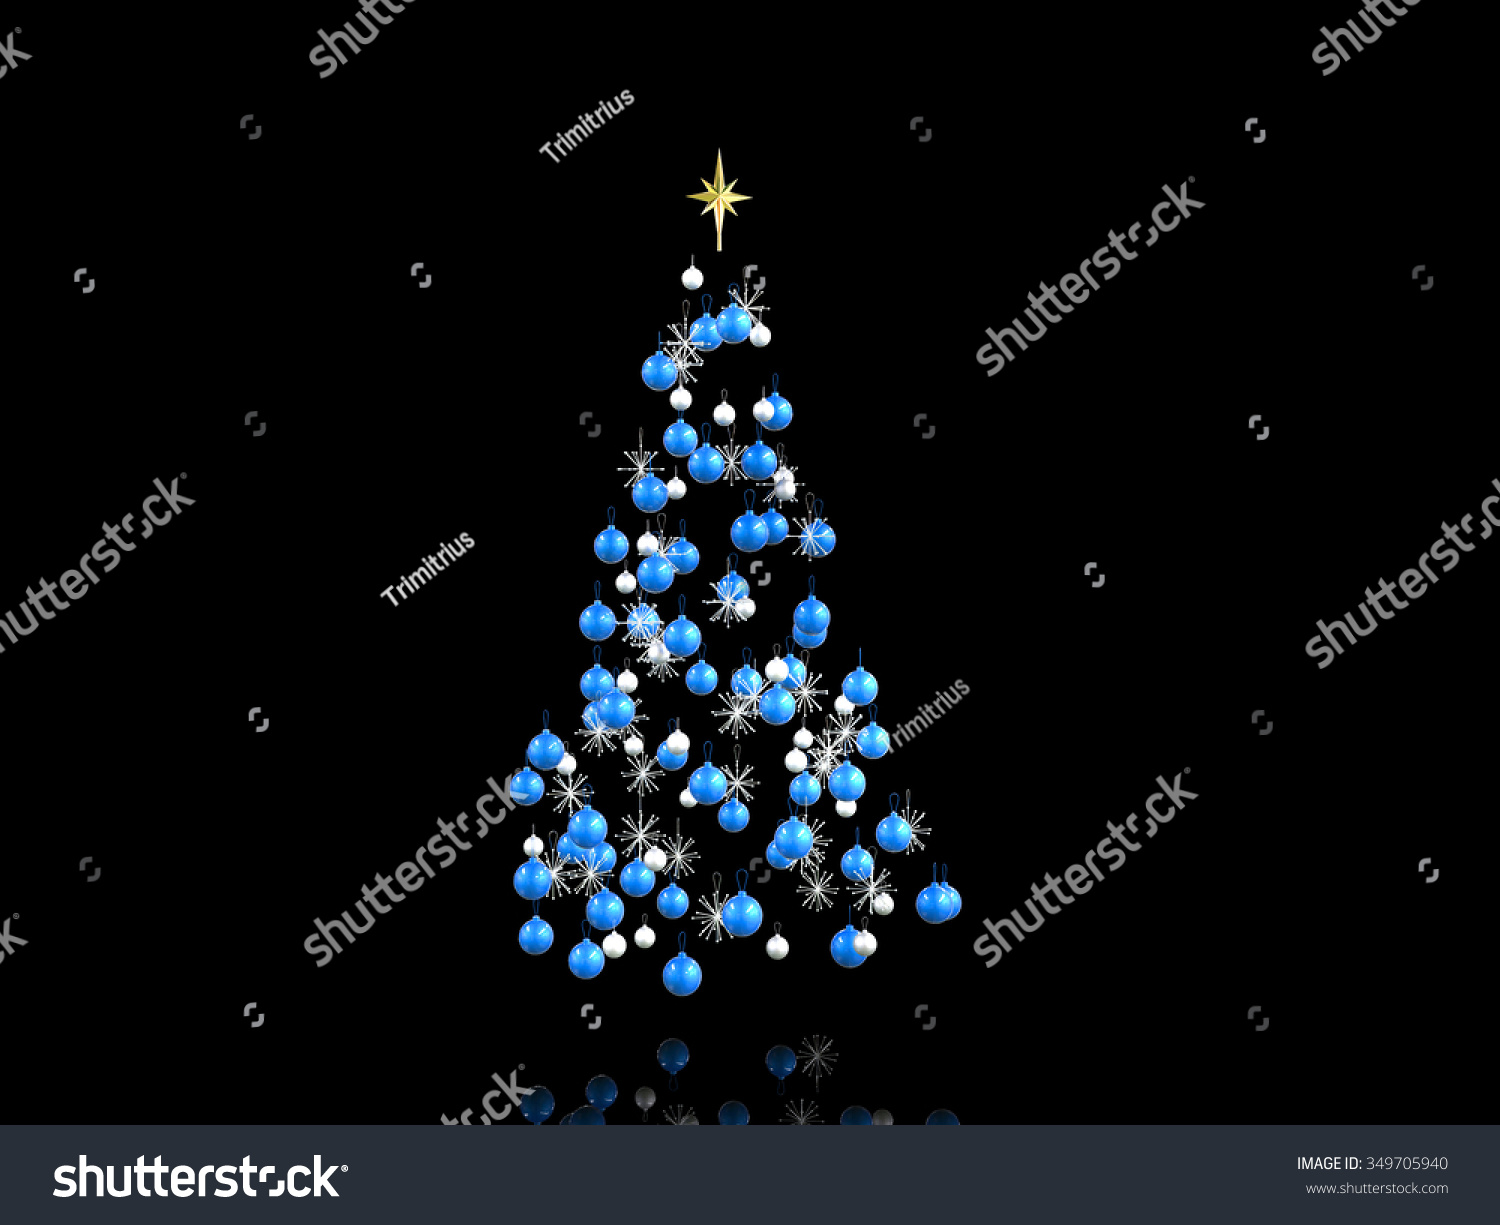 Blue Silver Christmas Decorations Isolated On Stock Illustration 349705940